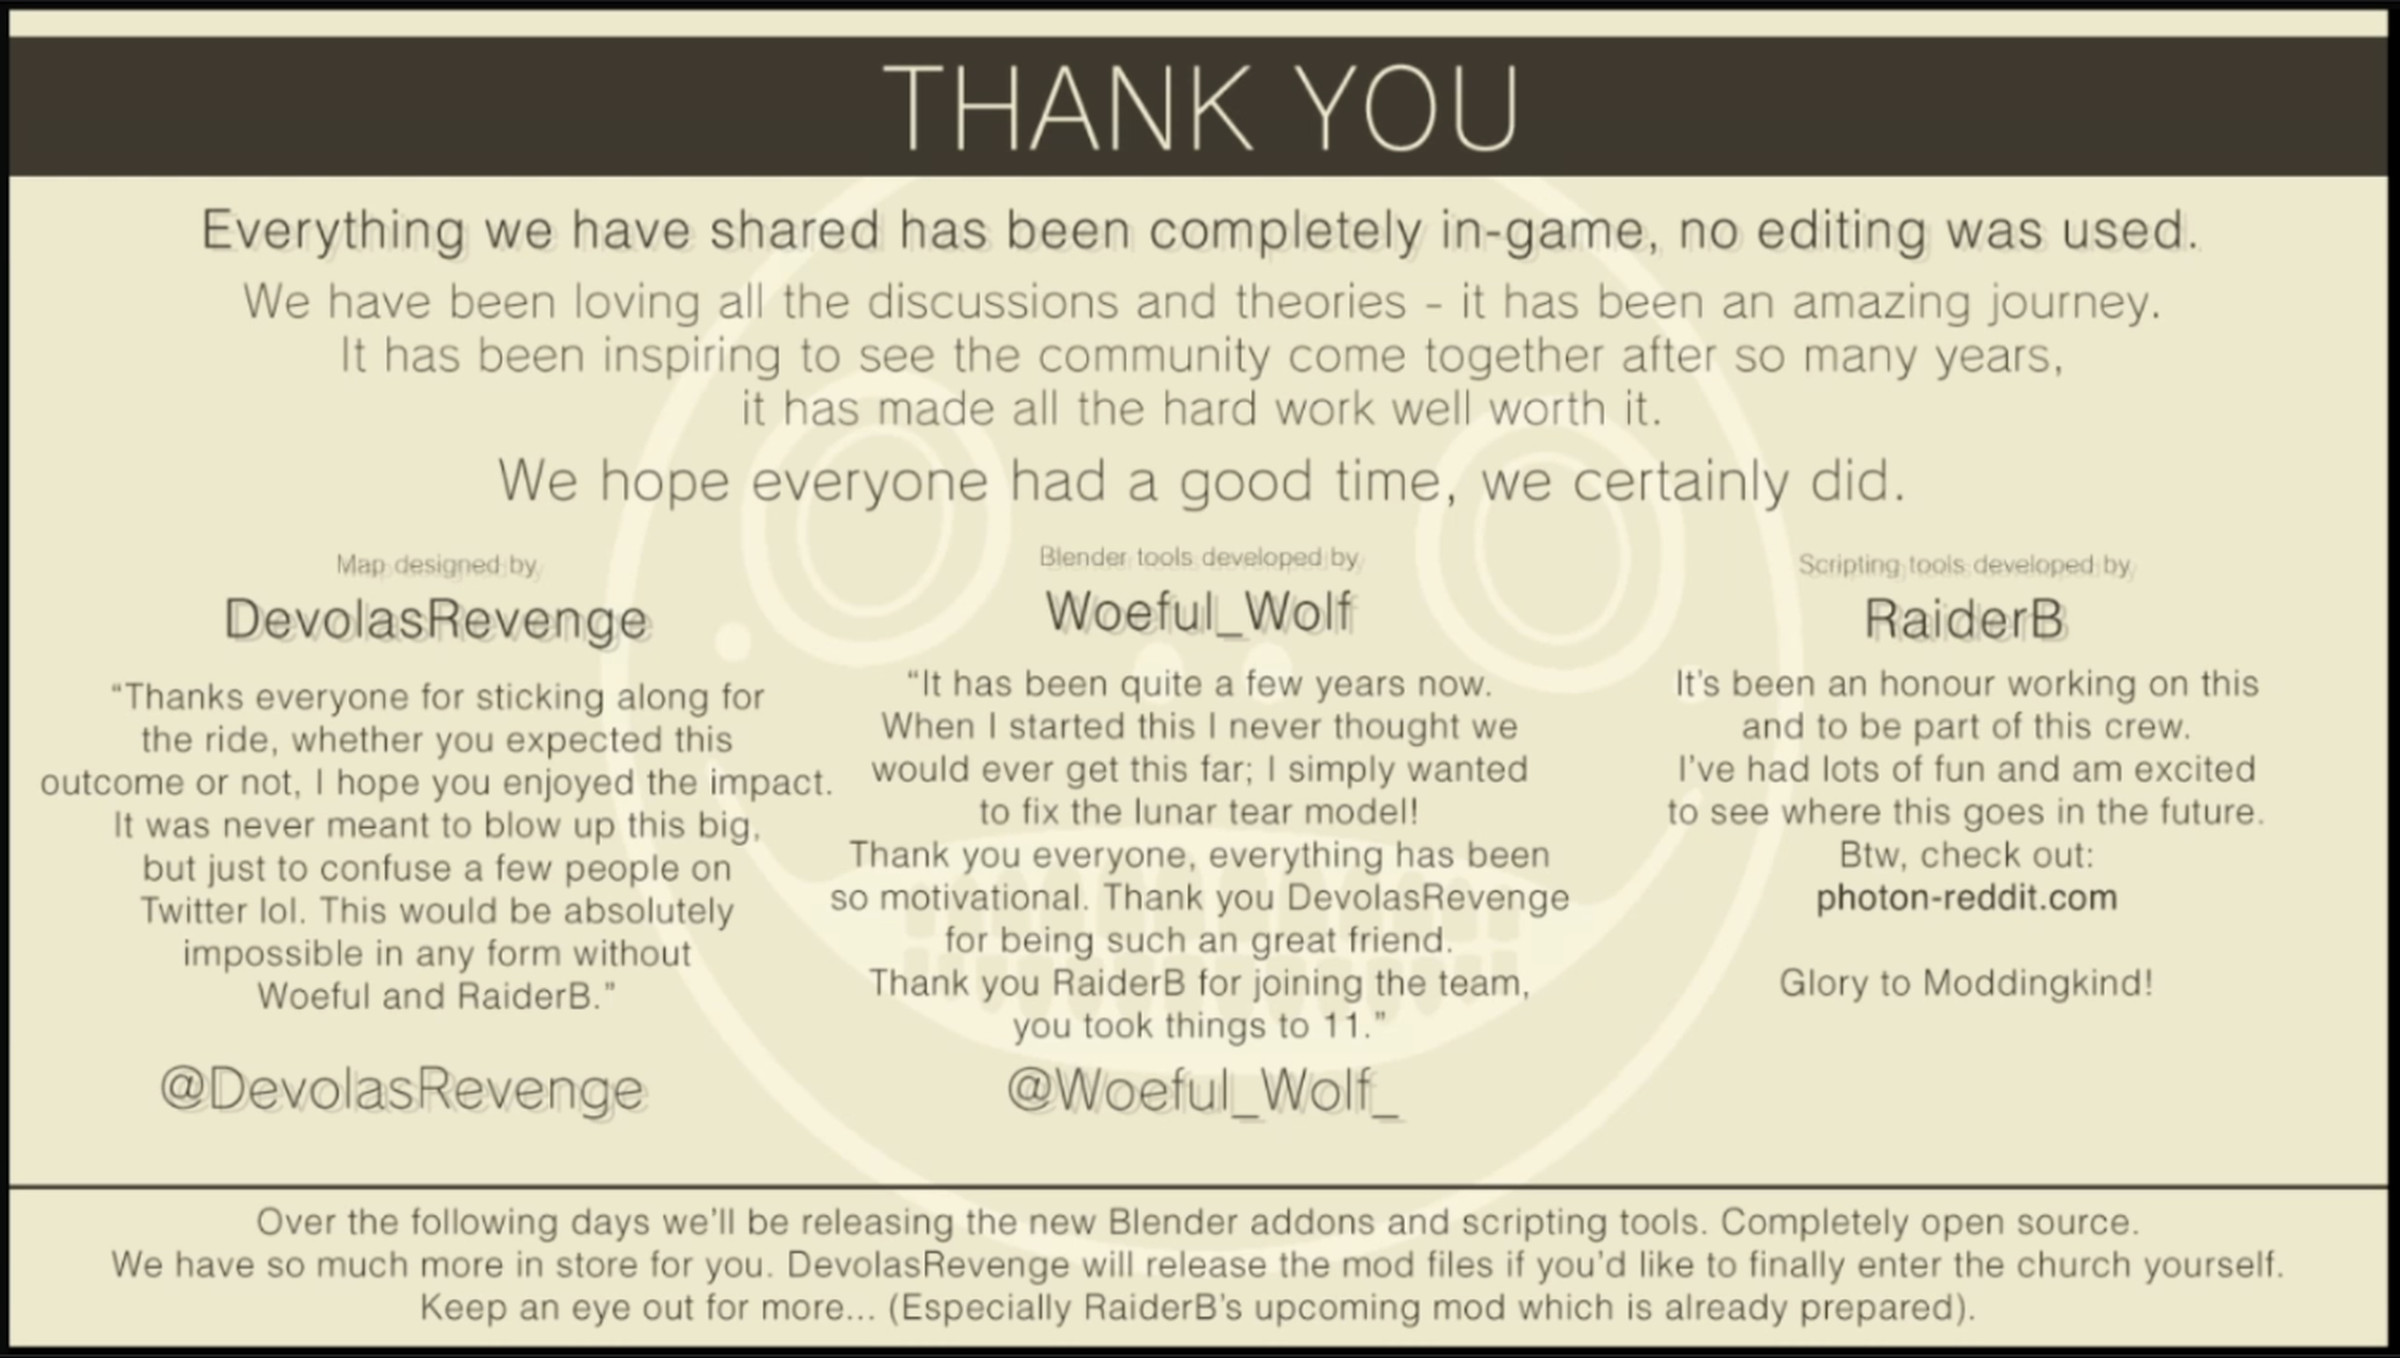 Thank you note from Nier: Automata modders explaining the hidden church was a mod they created and that they will release the assets for the mod in the coming days.